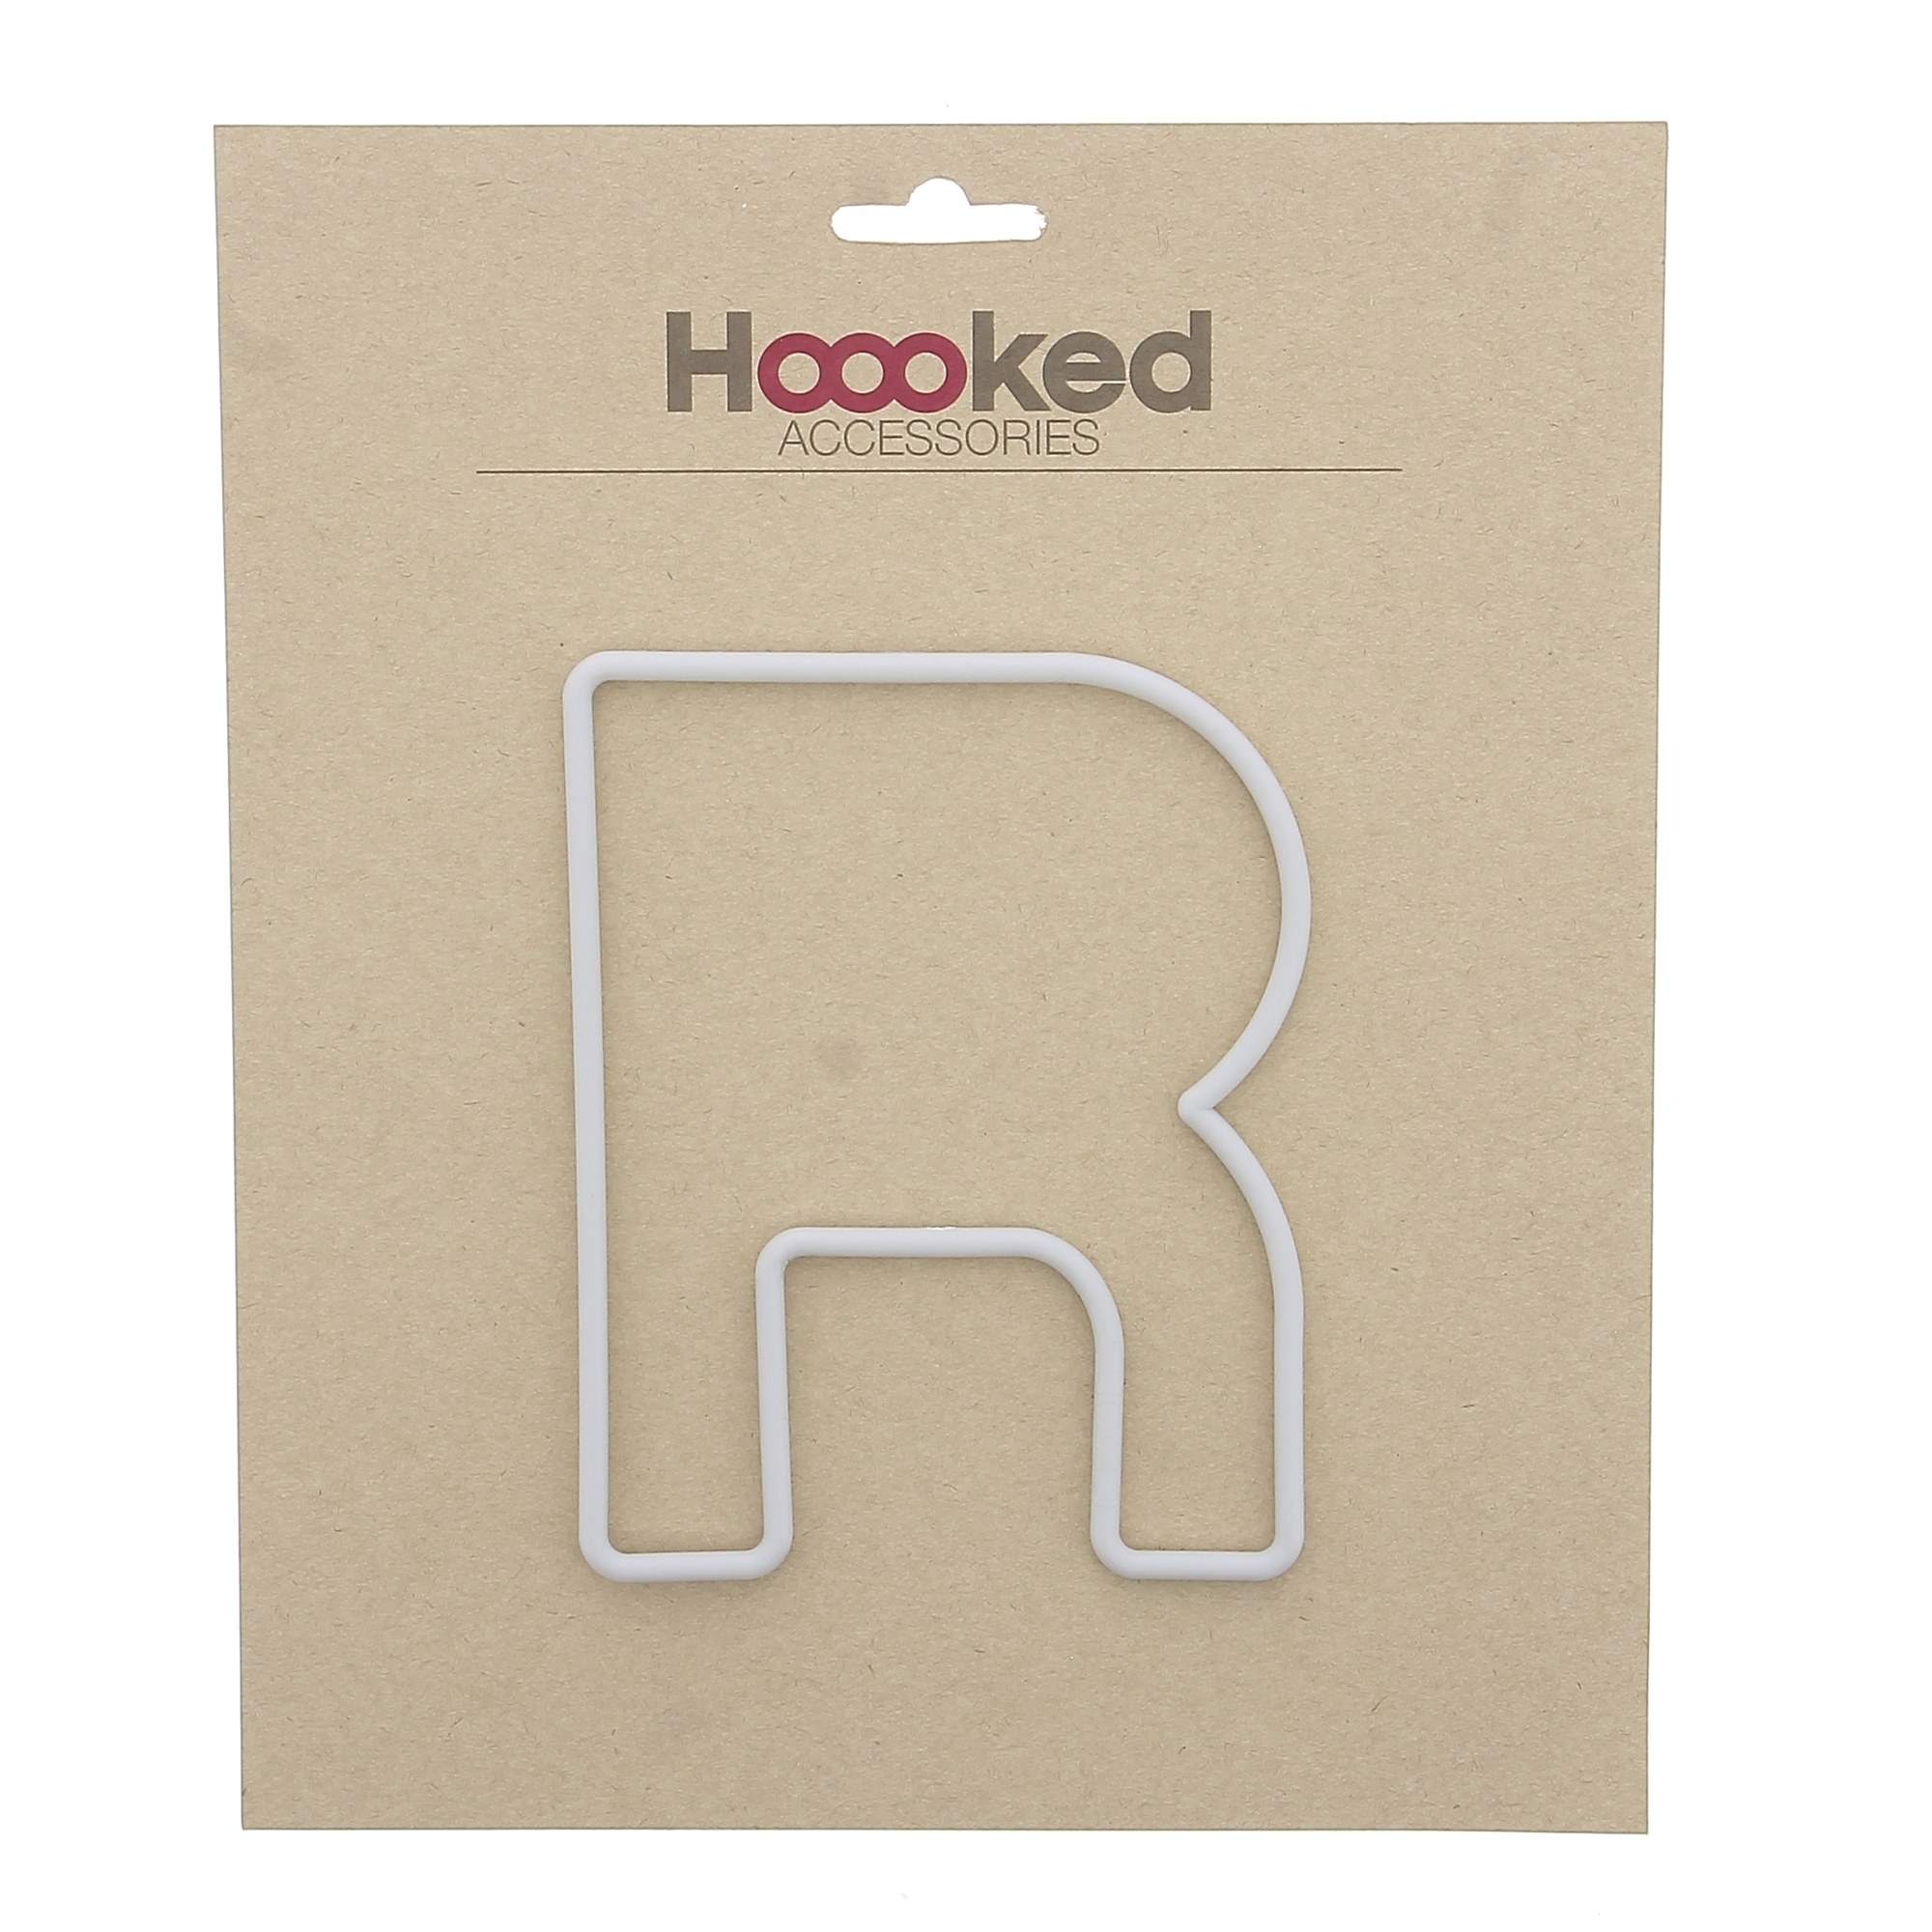 Hoooked - Letter R